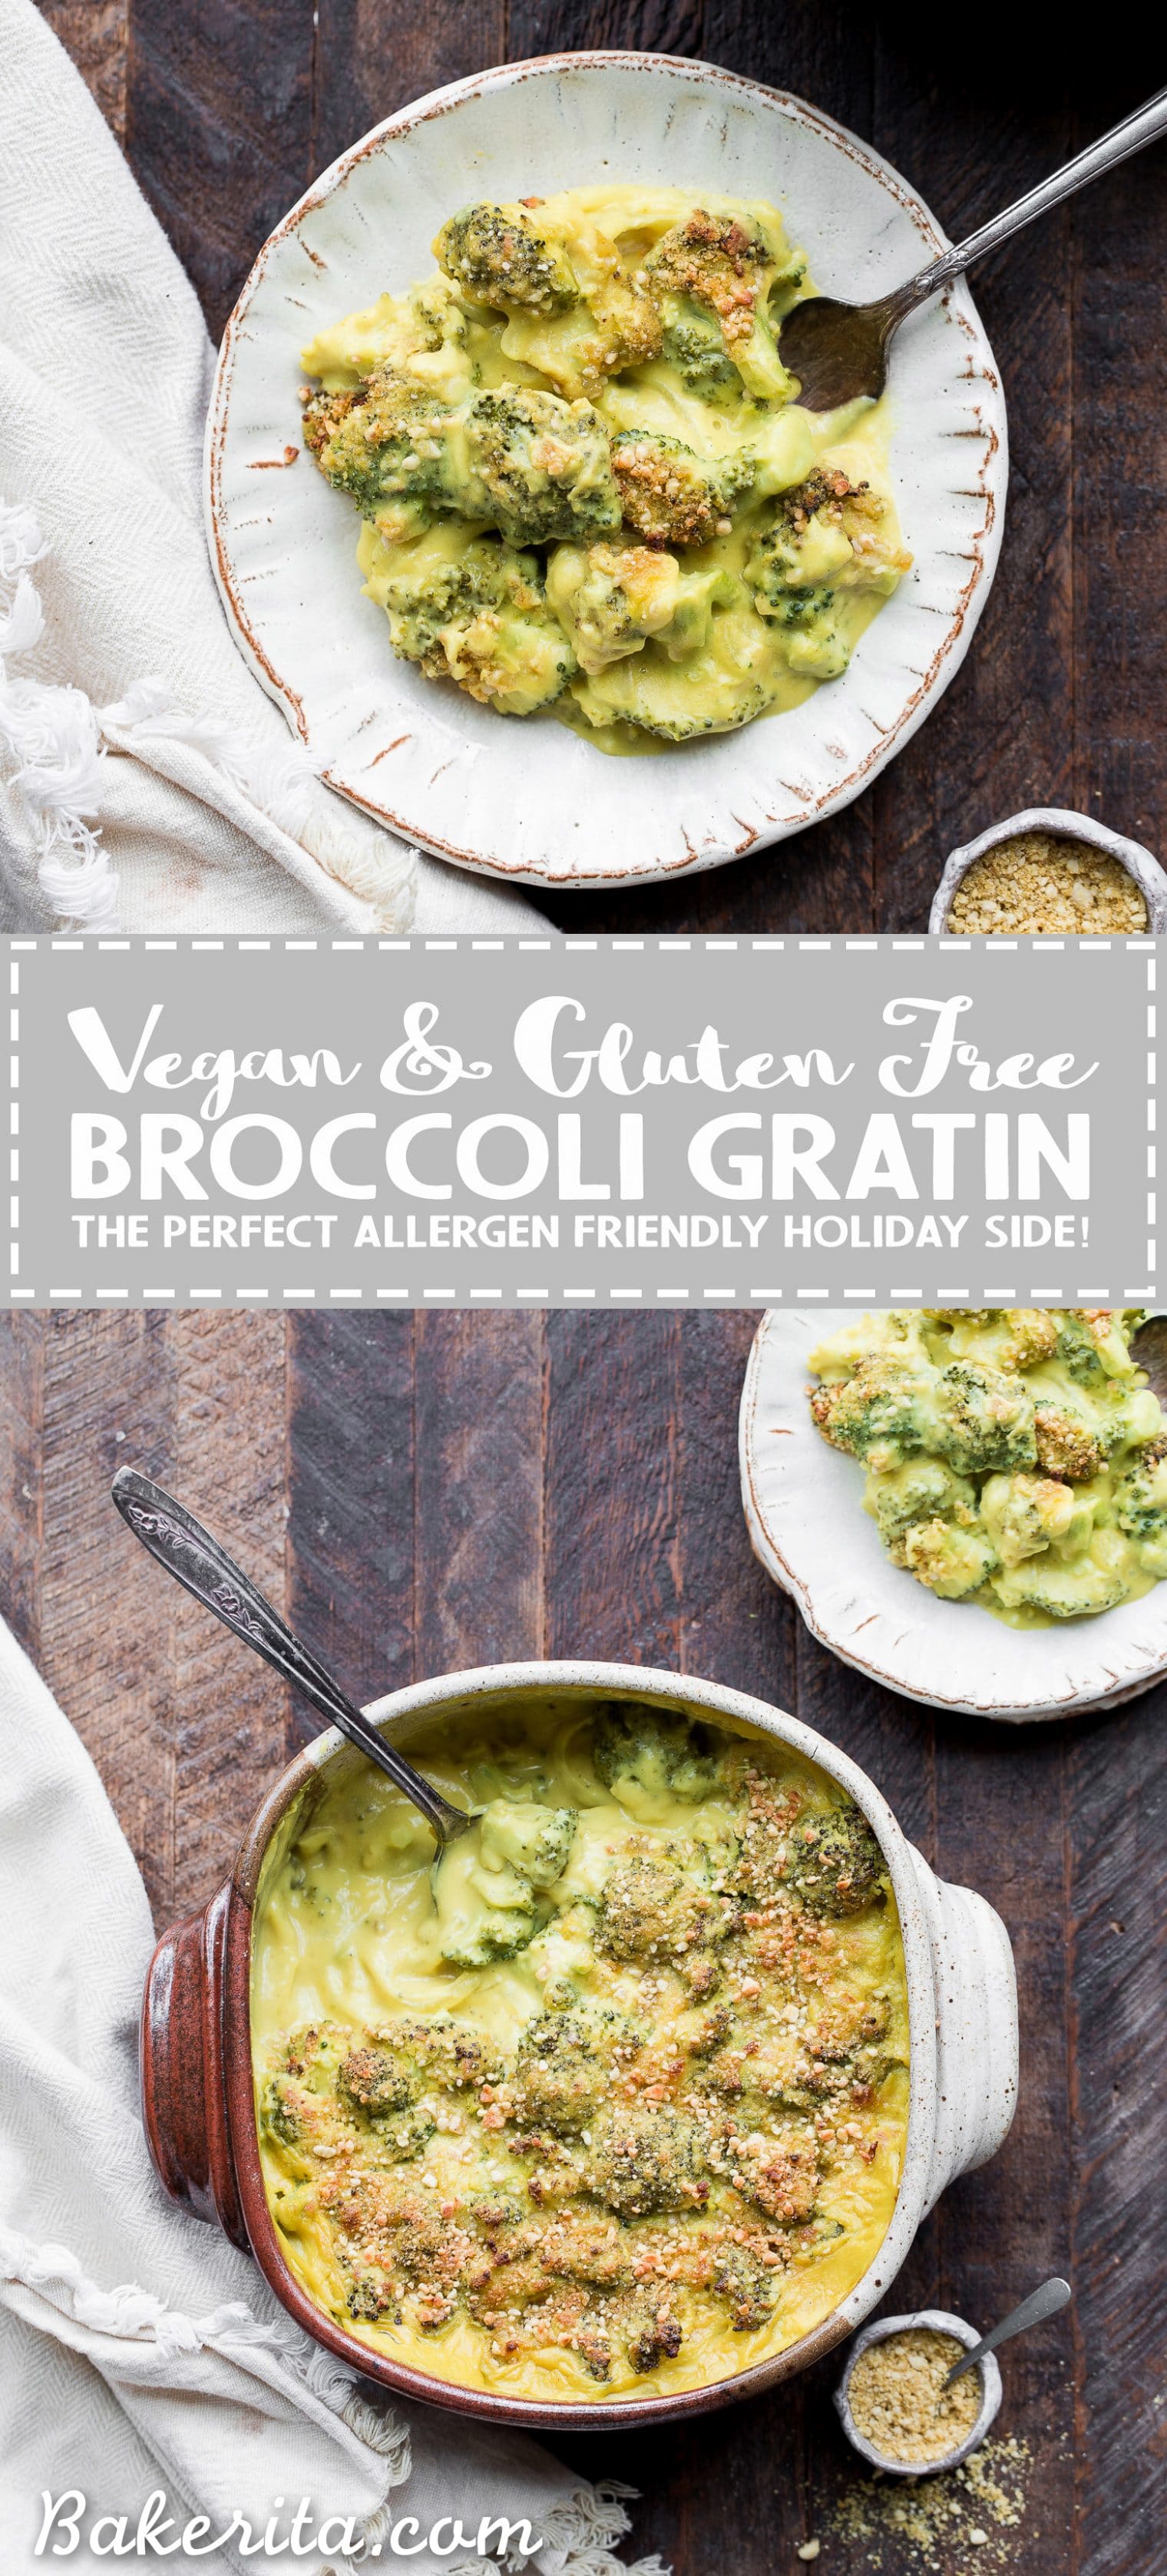 This Vegan Broccoli Gratin has a deliciously rich and "cheesy" sauce and is baked until golden brown on top. It's the perfect gluten-free and paleo side dish to serve with your Thanksgiving feast, or to enjoy any night of the week.